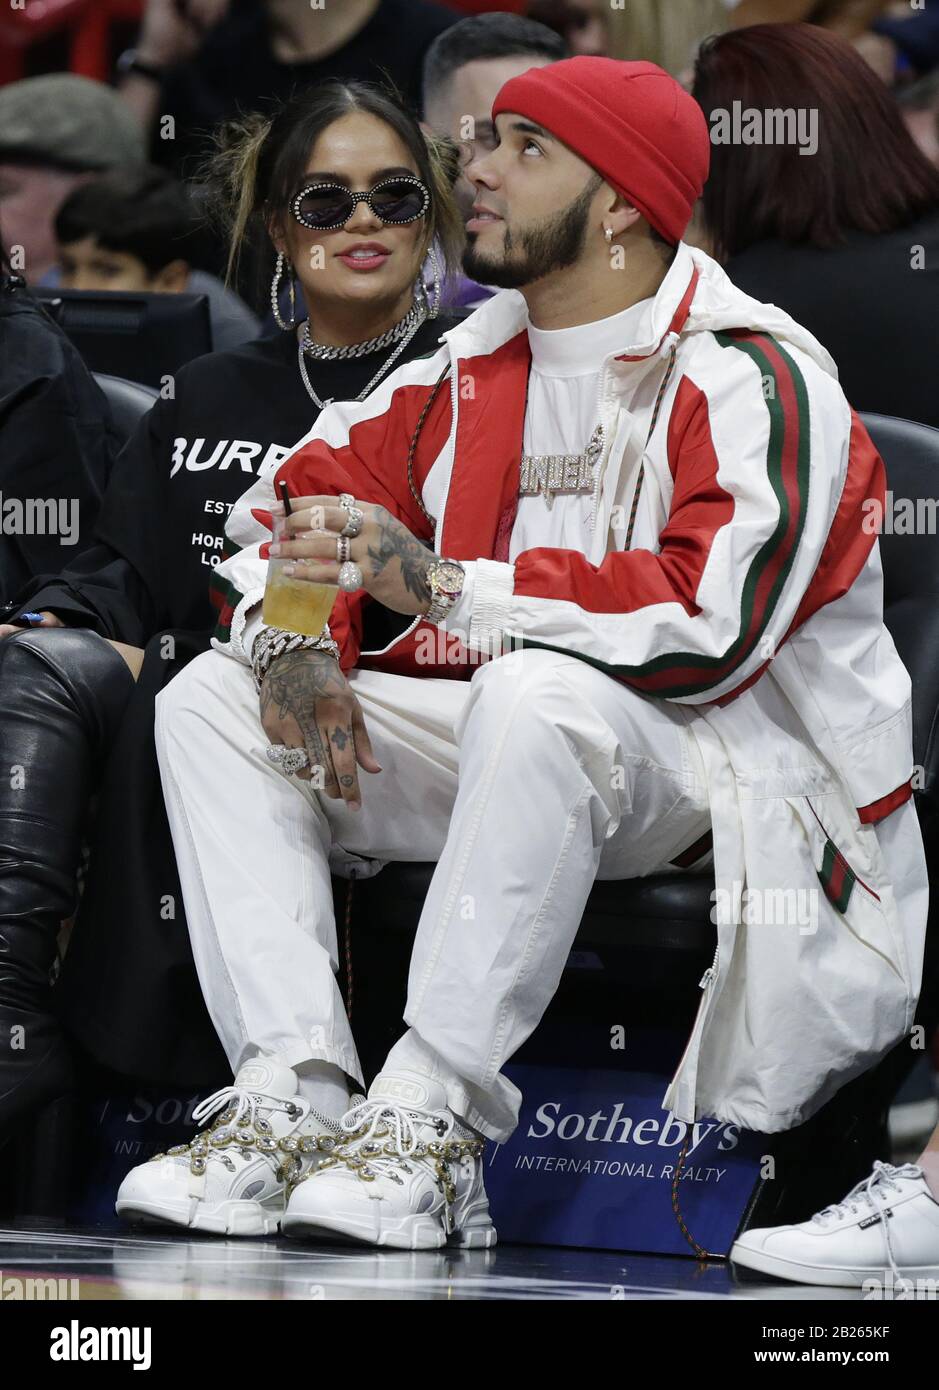 MIAMI BEACH, FL - FEBRUARY 28: Anuel AA is a Puerto Rican rapper and singer  seen court side at the Miami Heat game on February 28, 2020 in Miami,  Florida People: Anuel